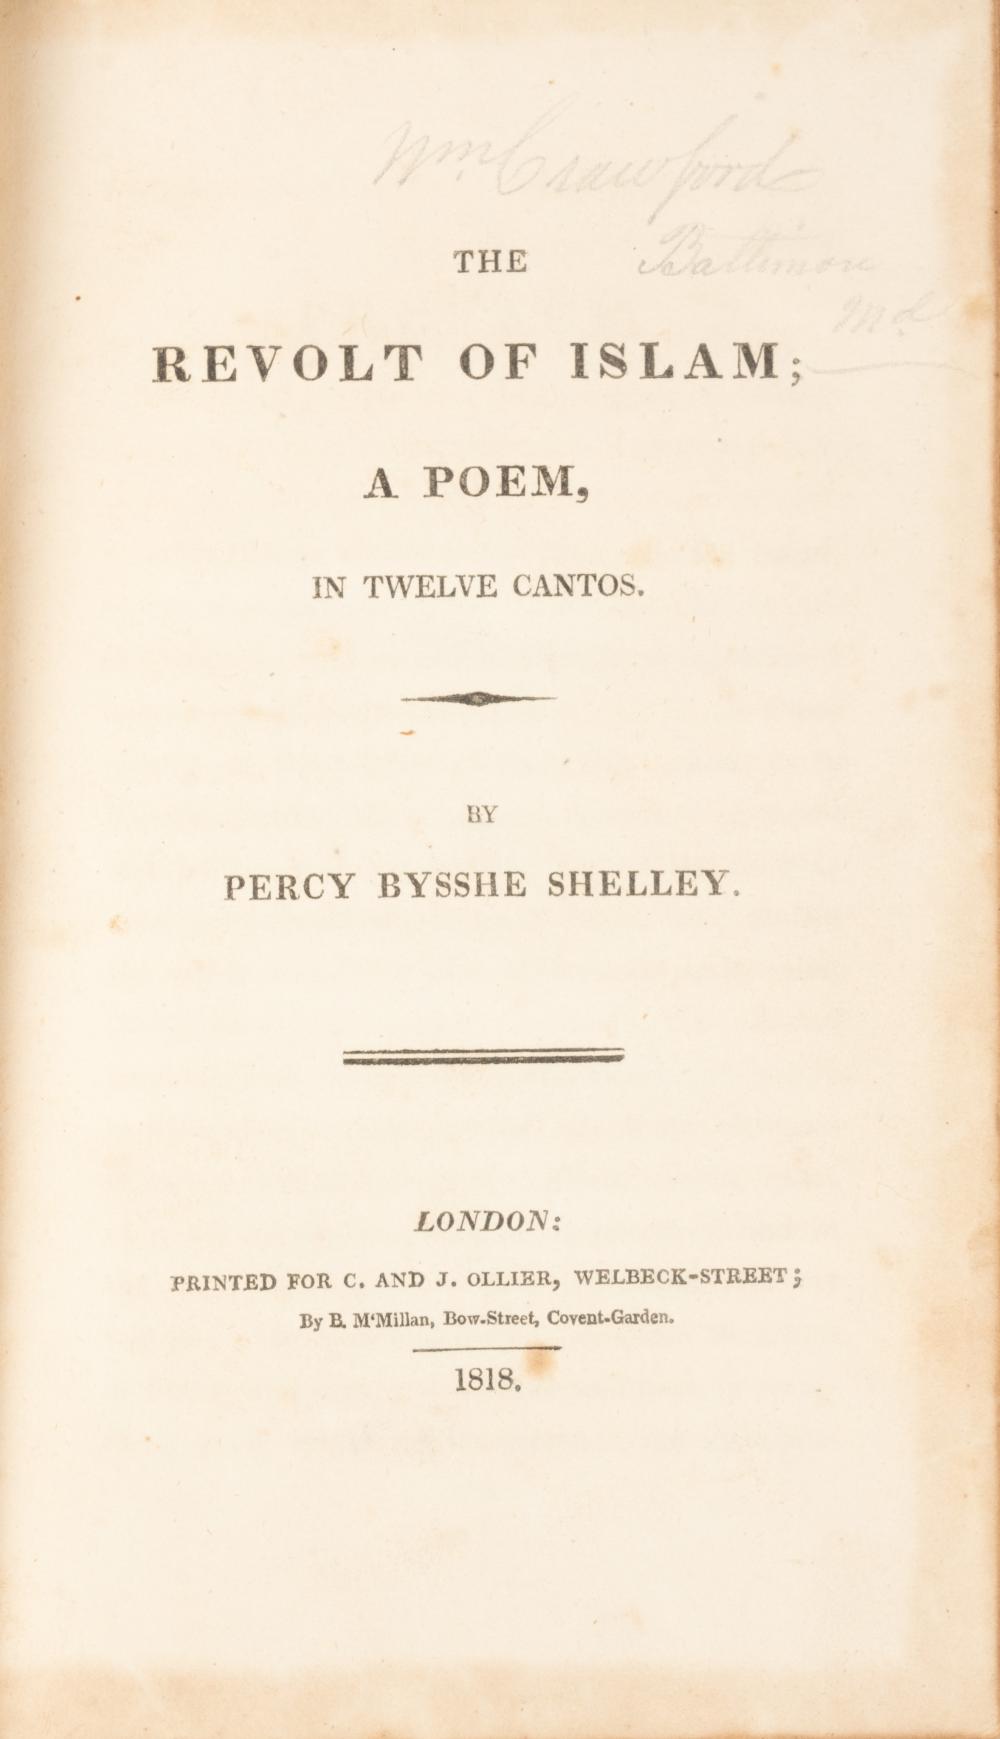 PERCY BYSSHE SHELLEY. THE REVOLT